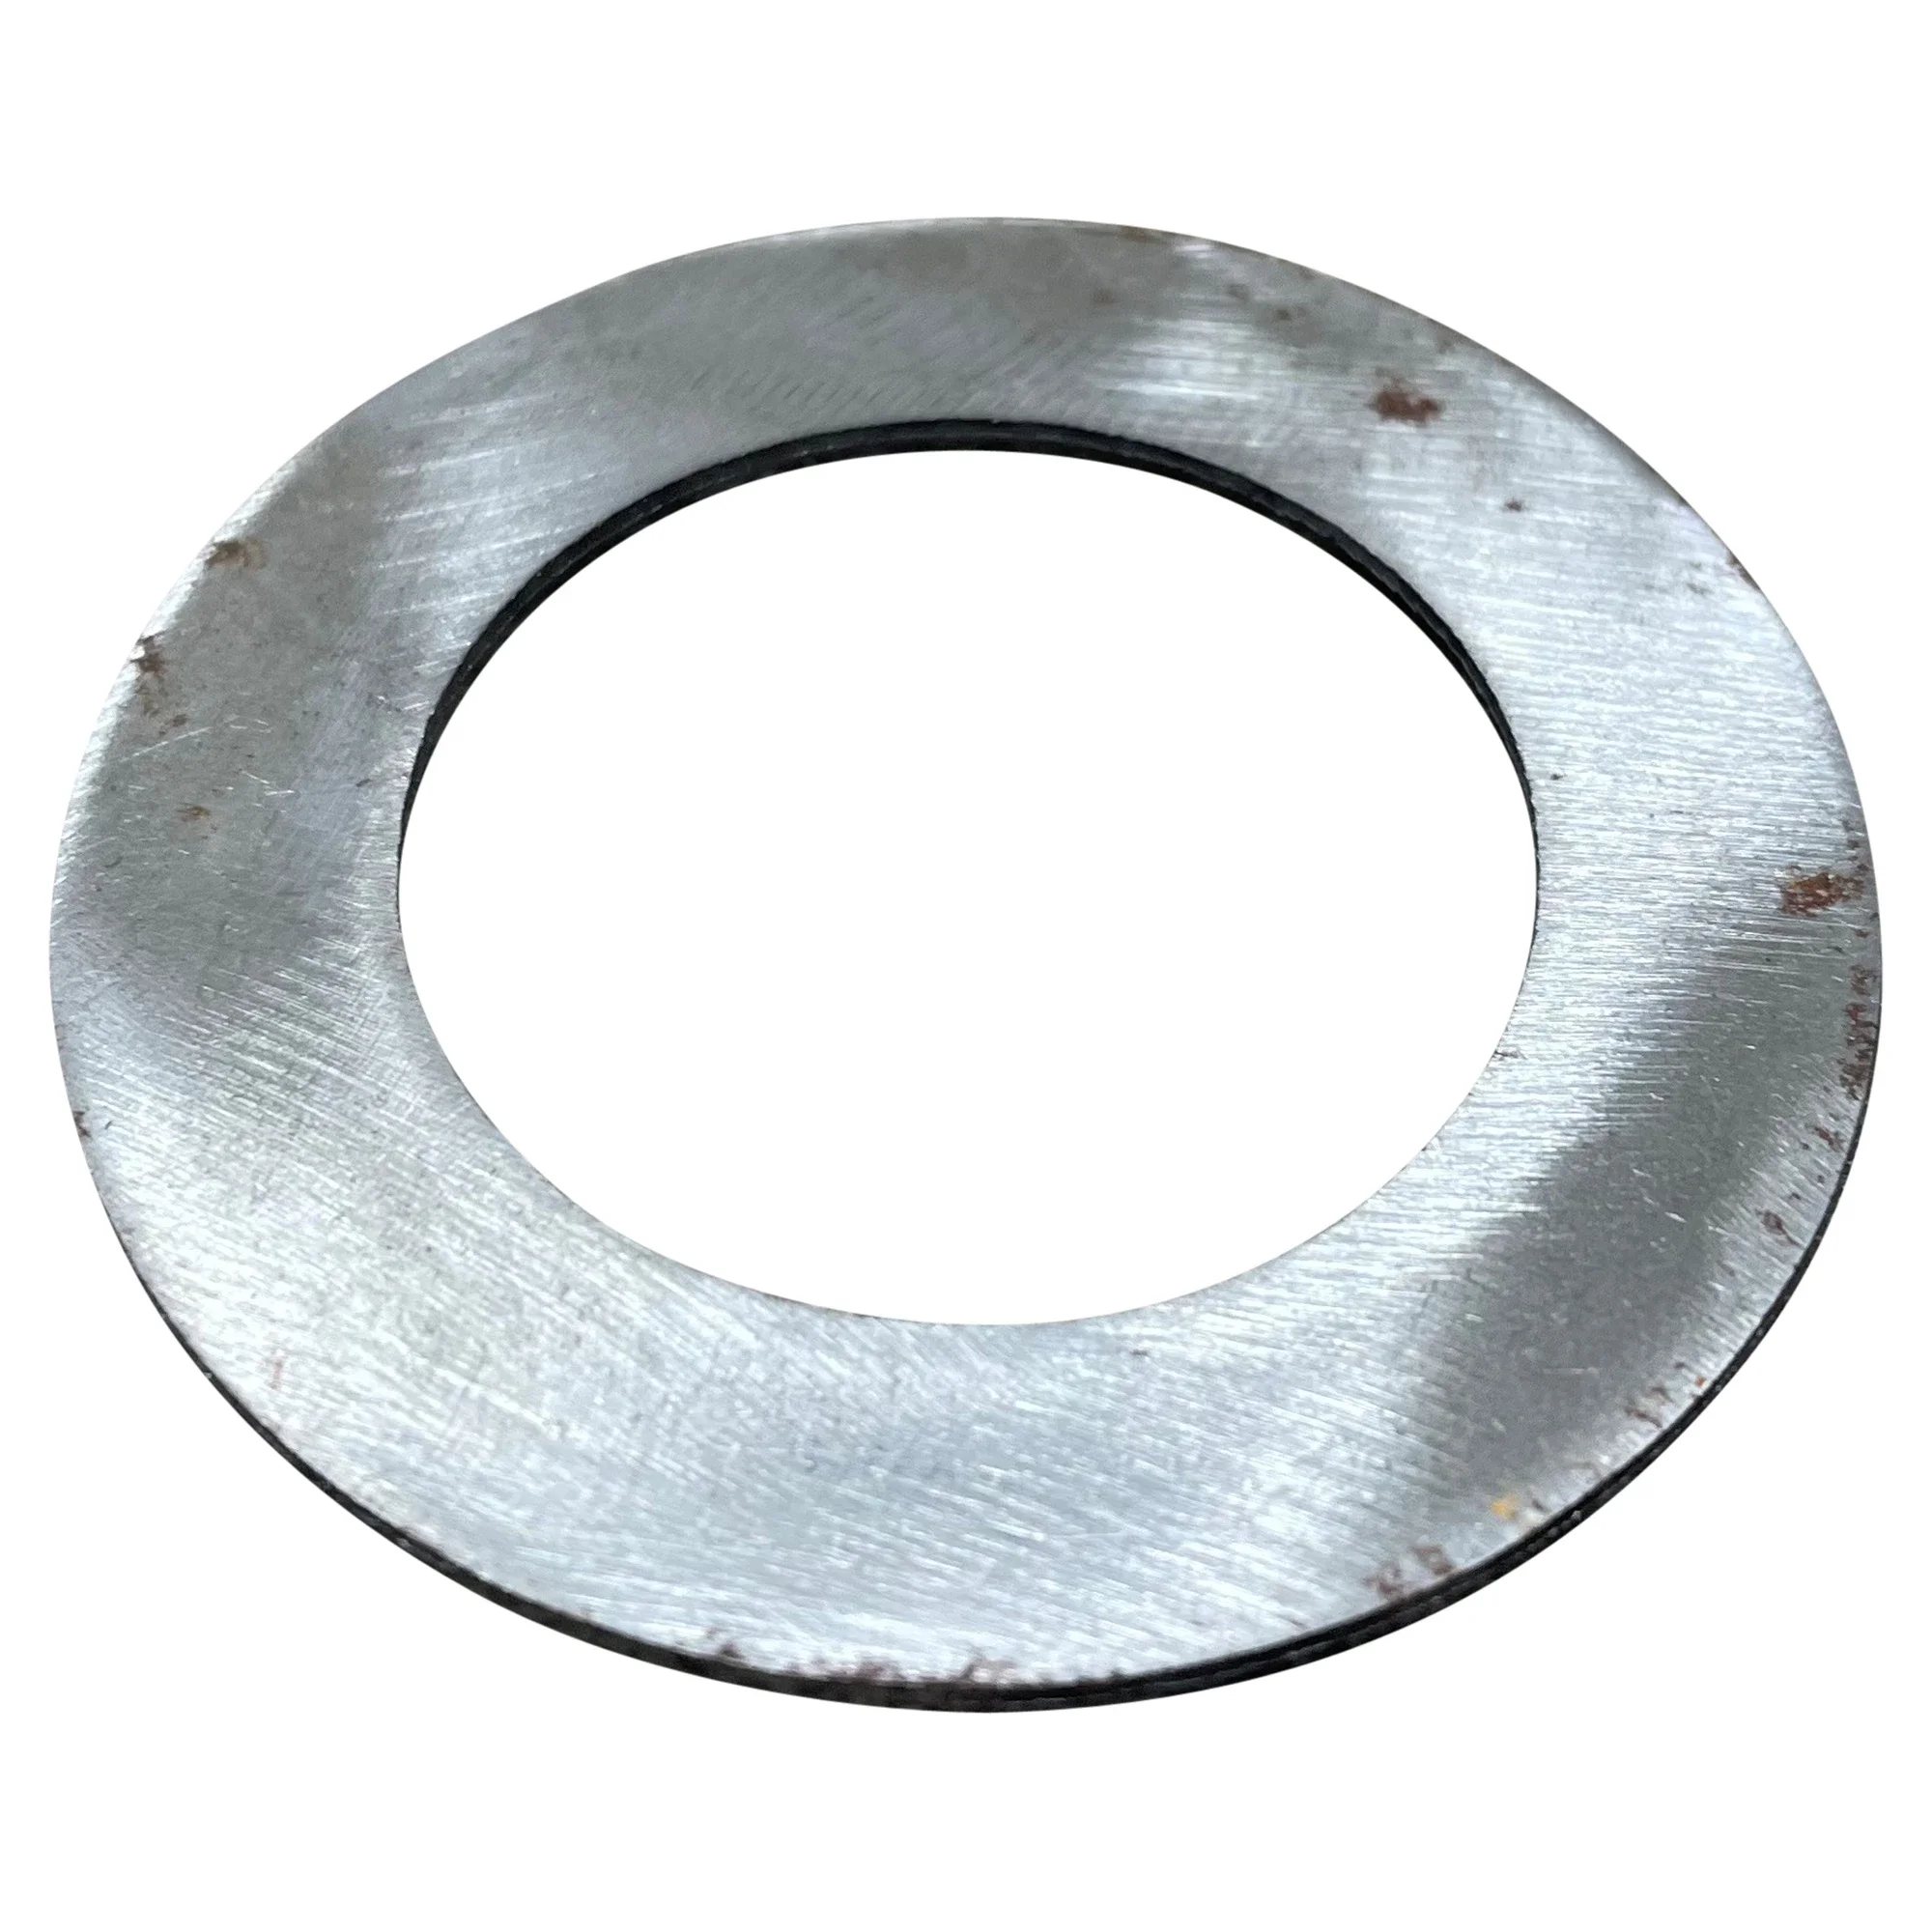 Wastebuilt® Replacement for McNeilus 1.25 x 2 x 0.06 Thrust Bearing